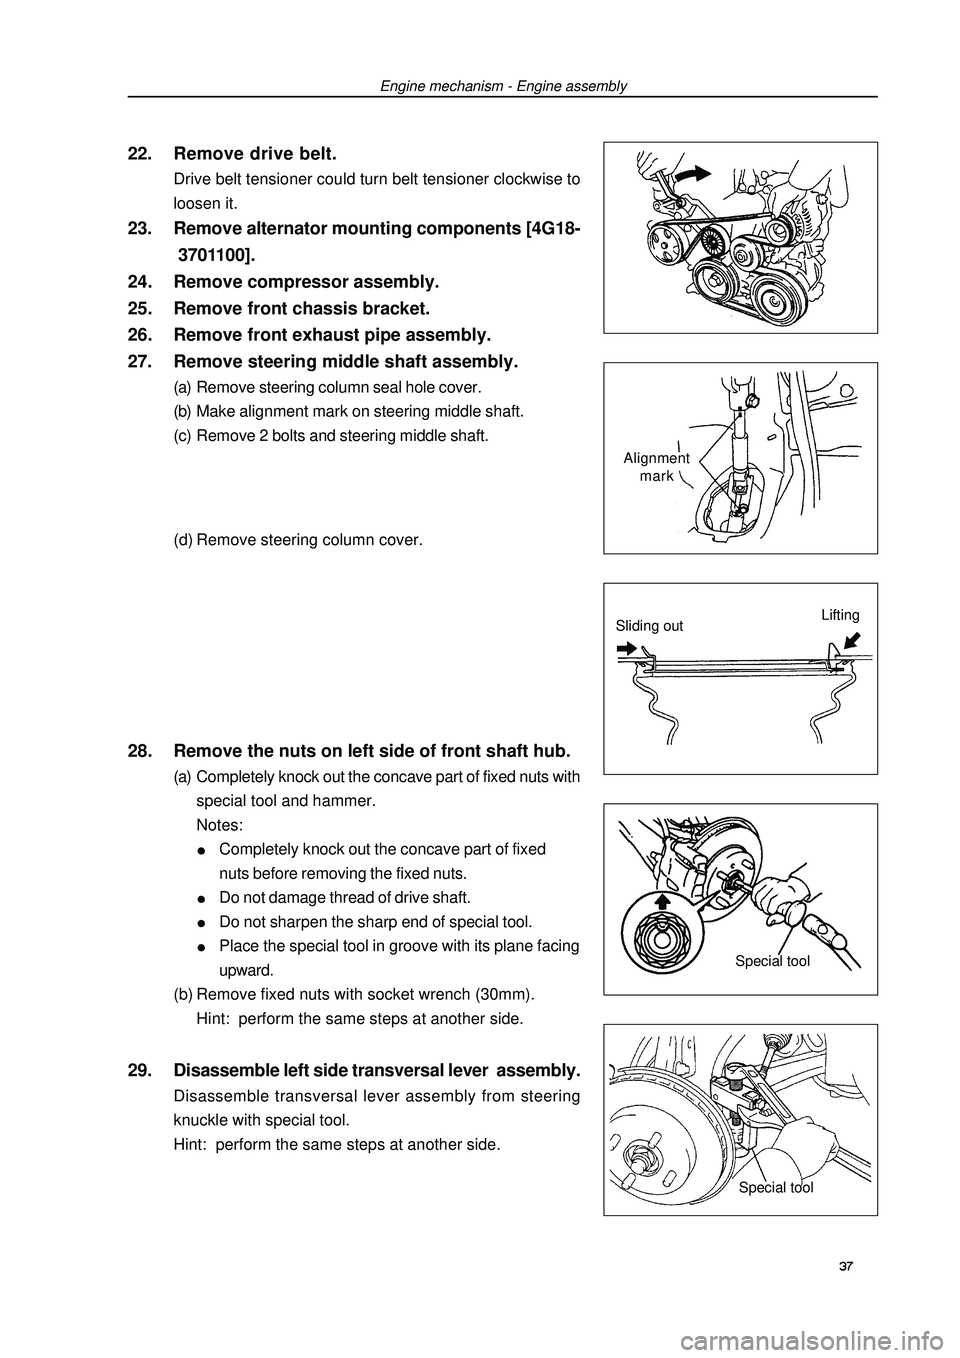 GEELY FC 2008 Service Manual Engine mechanism - Engine assembly22. Remove drive belt.Drive belt tensioner could turn belt tensioner clockwise to
loosen it.23. Remove alternator mounting components [4G18-
3701100].
24. Remove comp